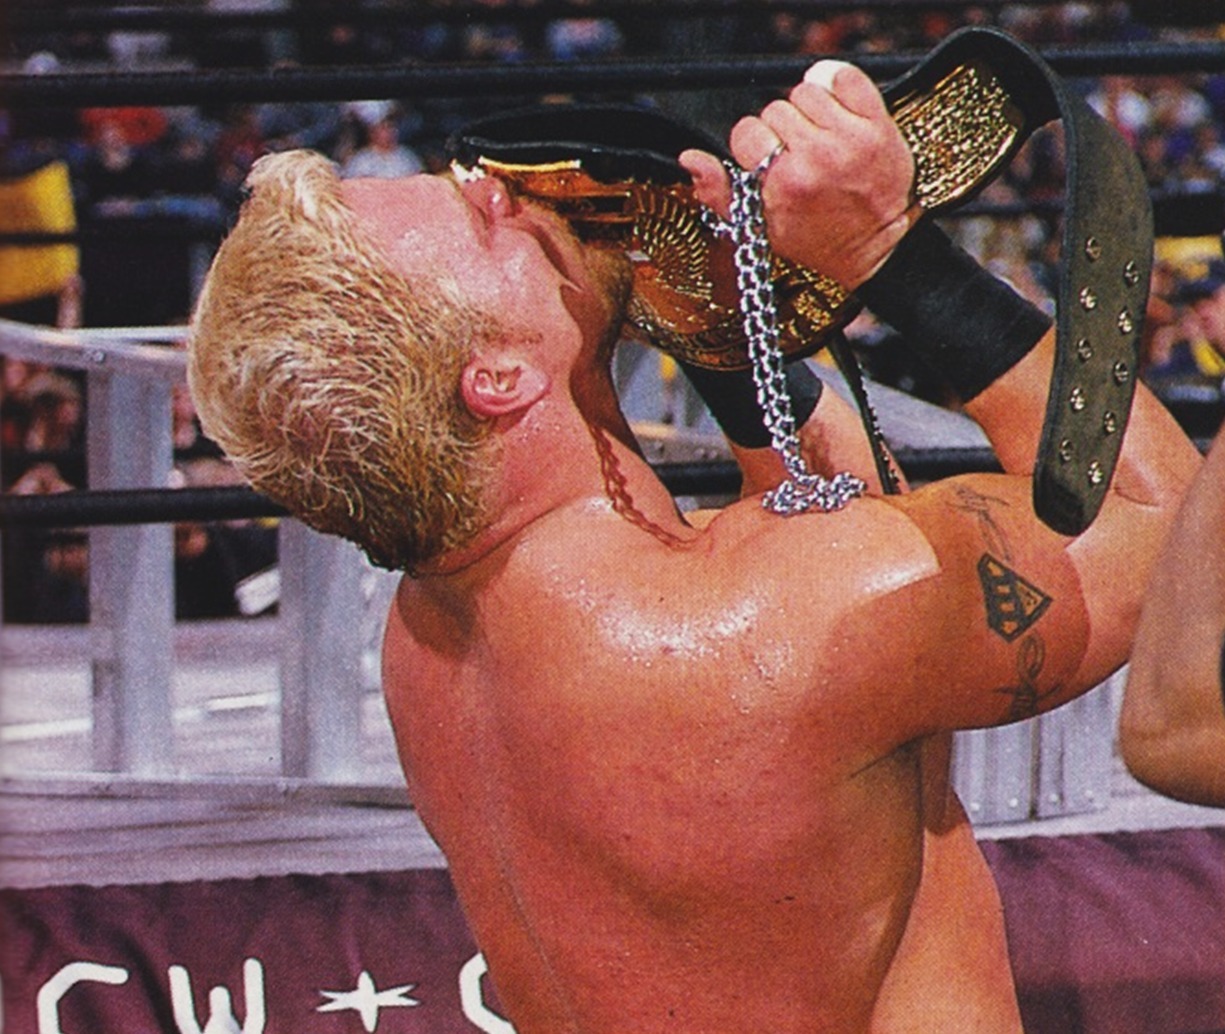 Shane Douglas was the first to hold ECW, WCW, and WWE titles